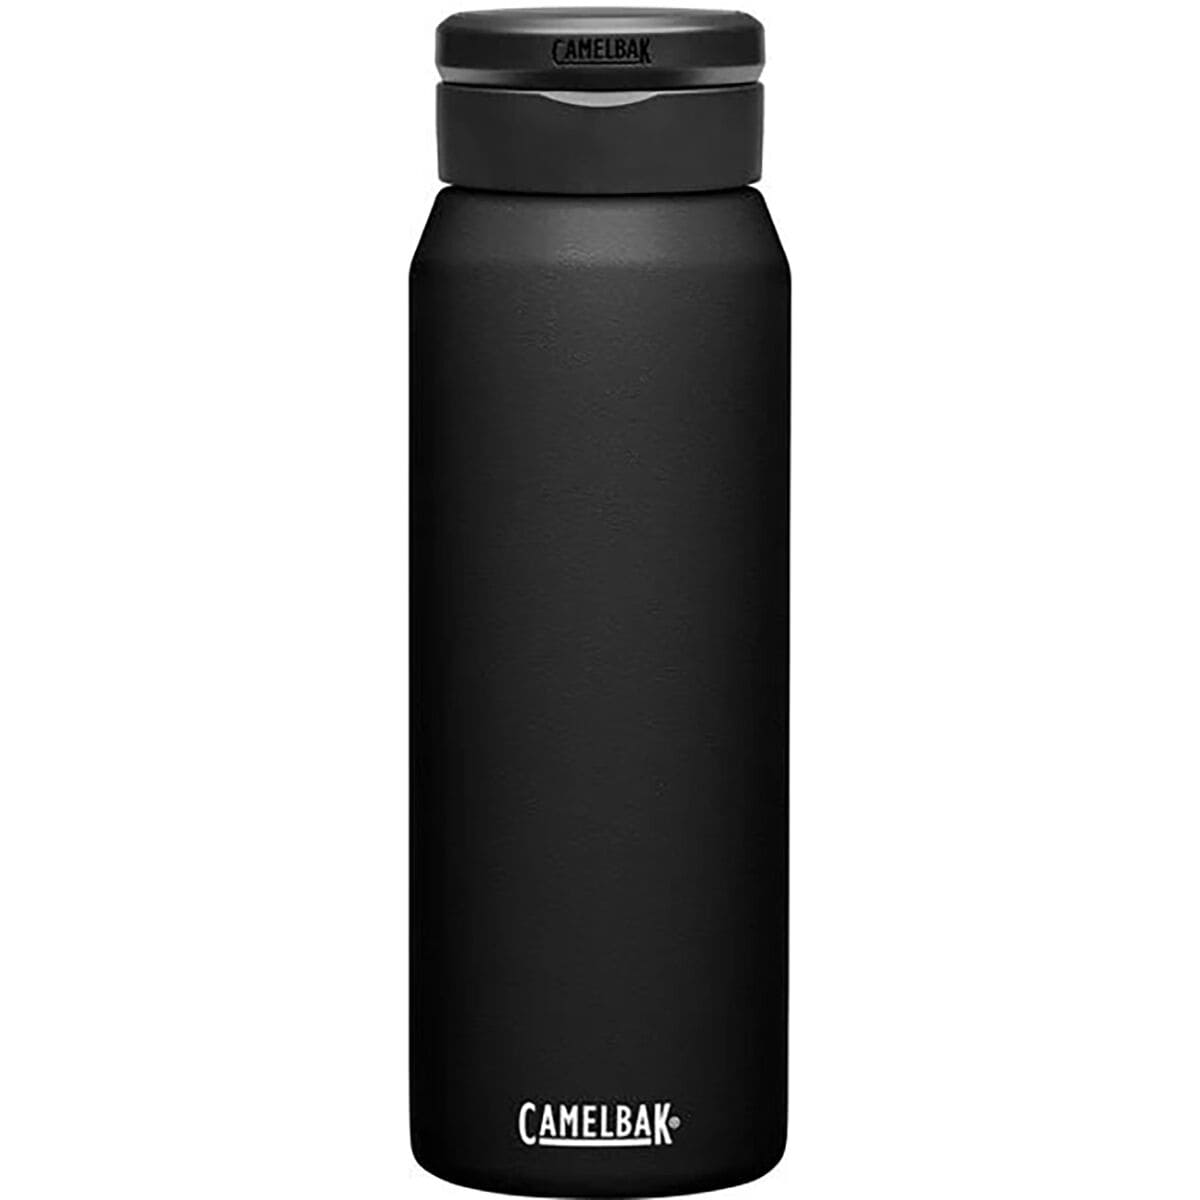 Photos - Glass CamelBak Fit Cap 32oz Vacuum Insulated Stainless Steel Bottle 